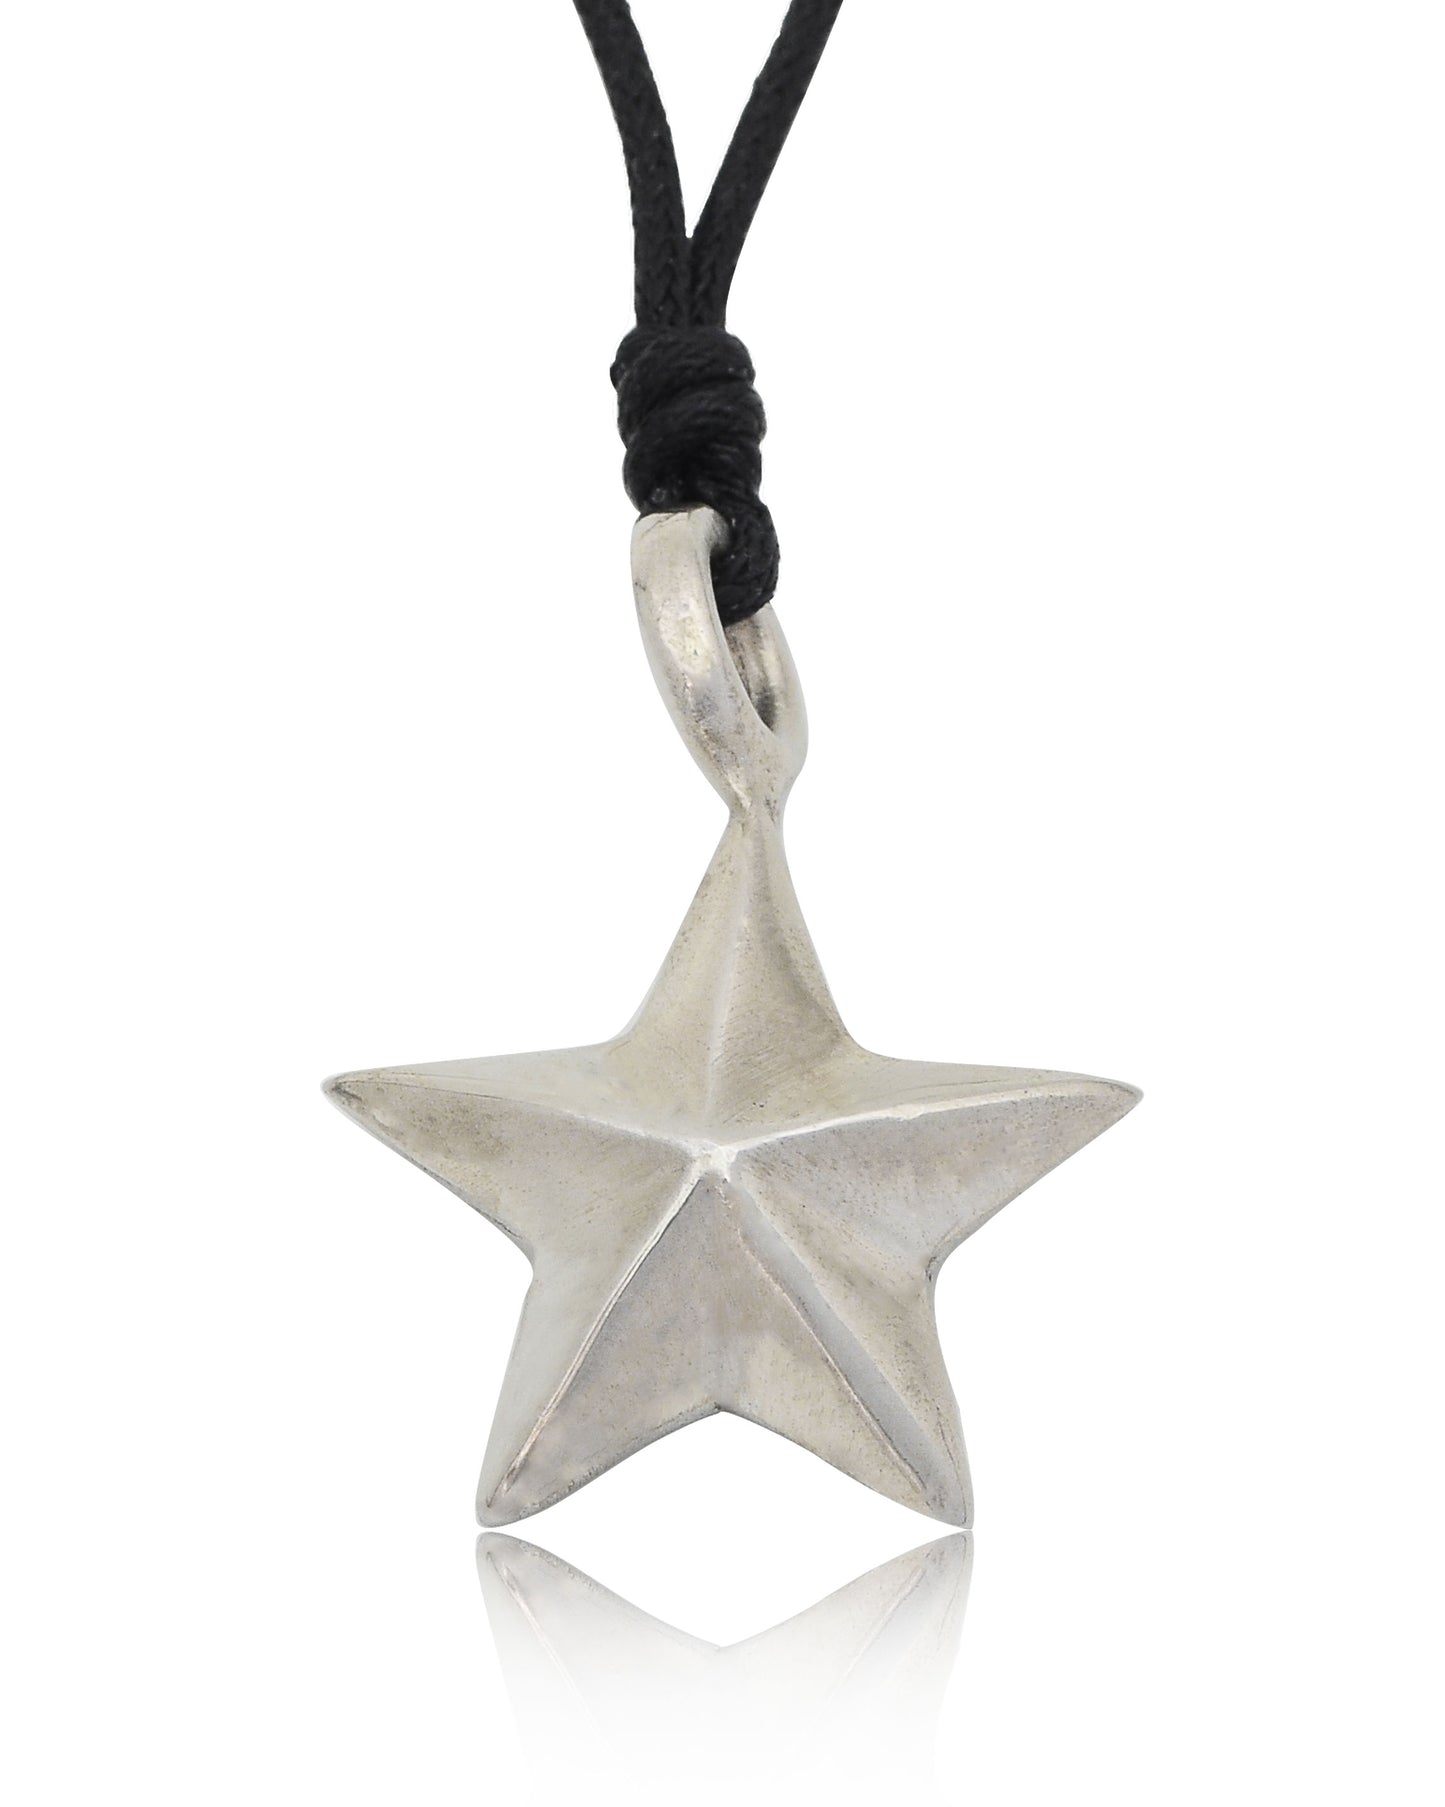 Communist Star Silver Pewter Charm Necklace Pendant Jewelry